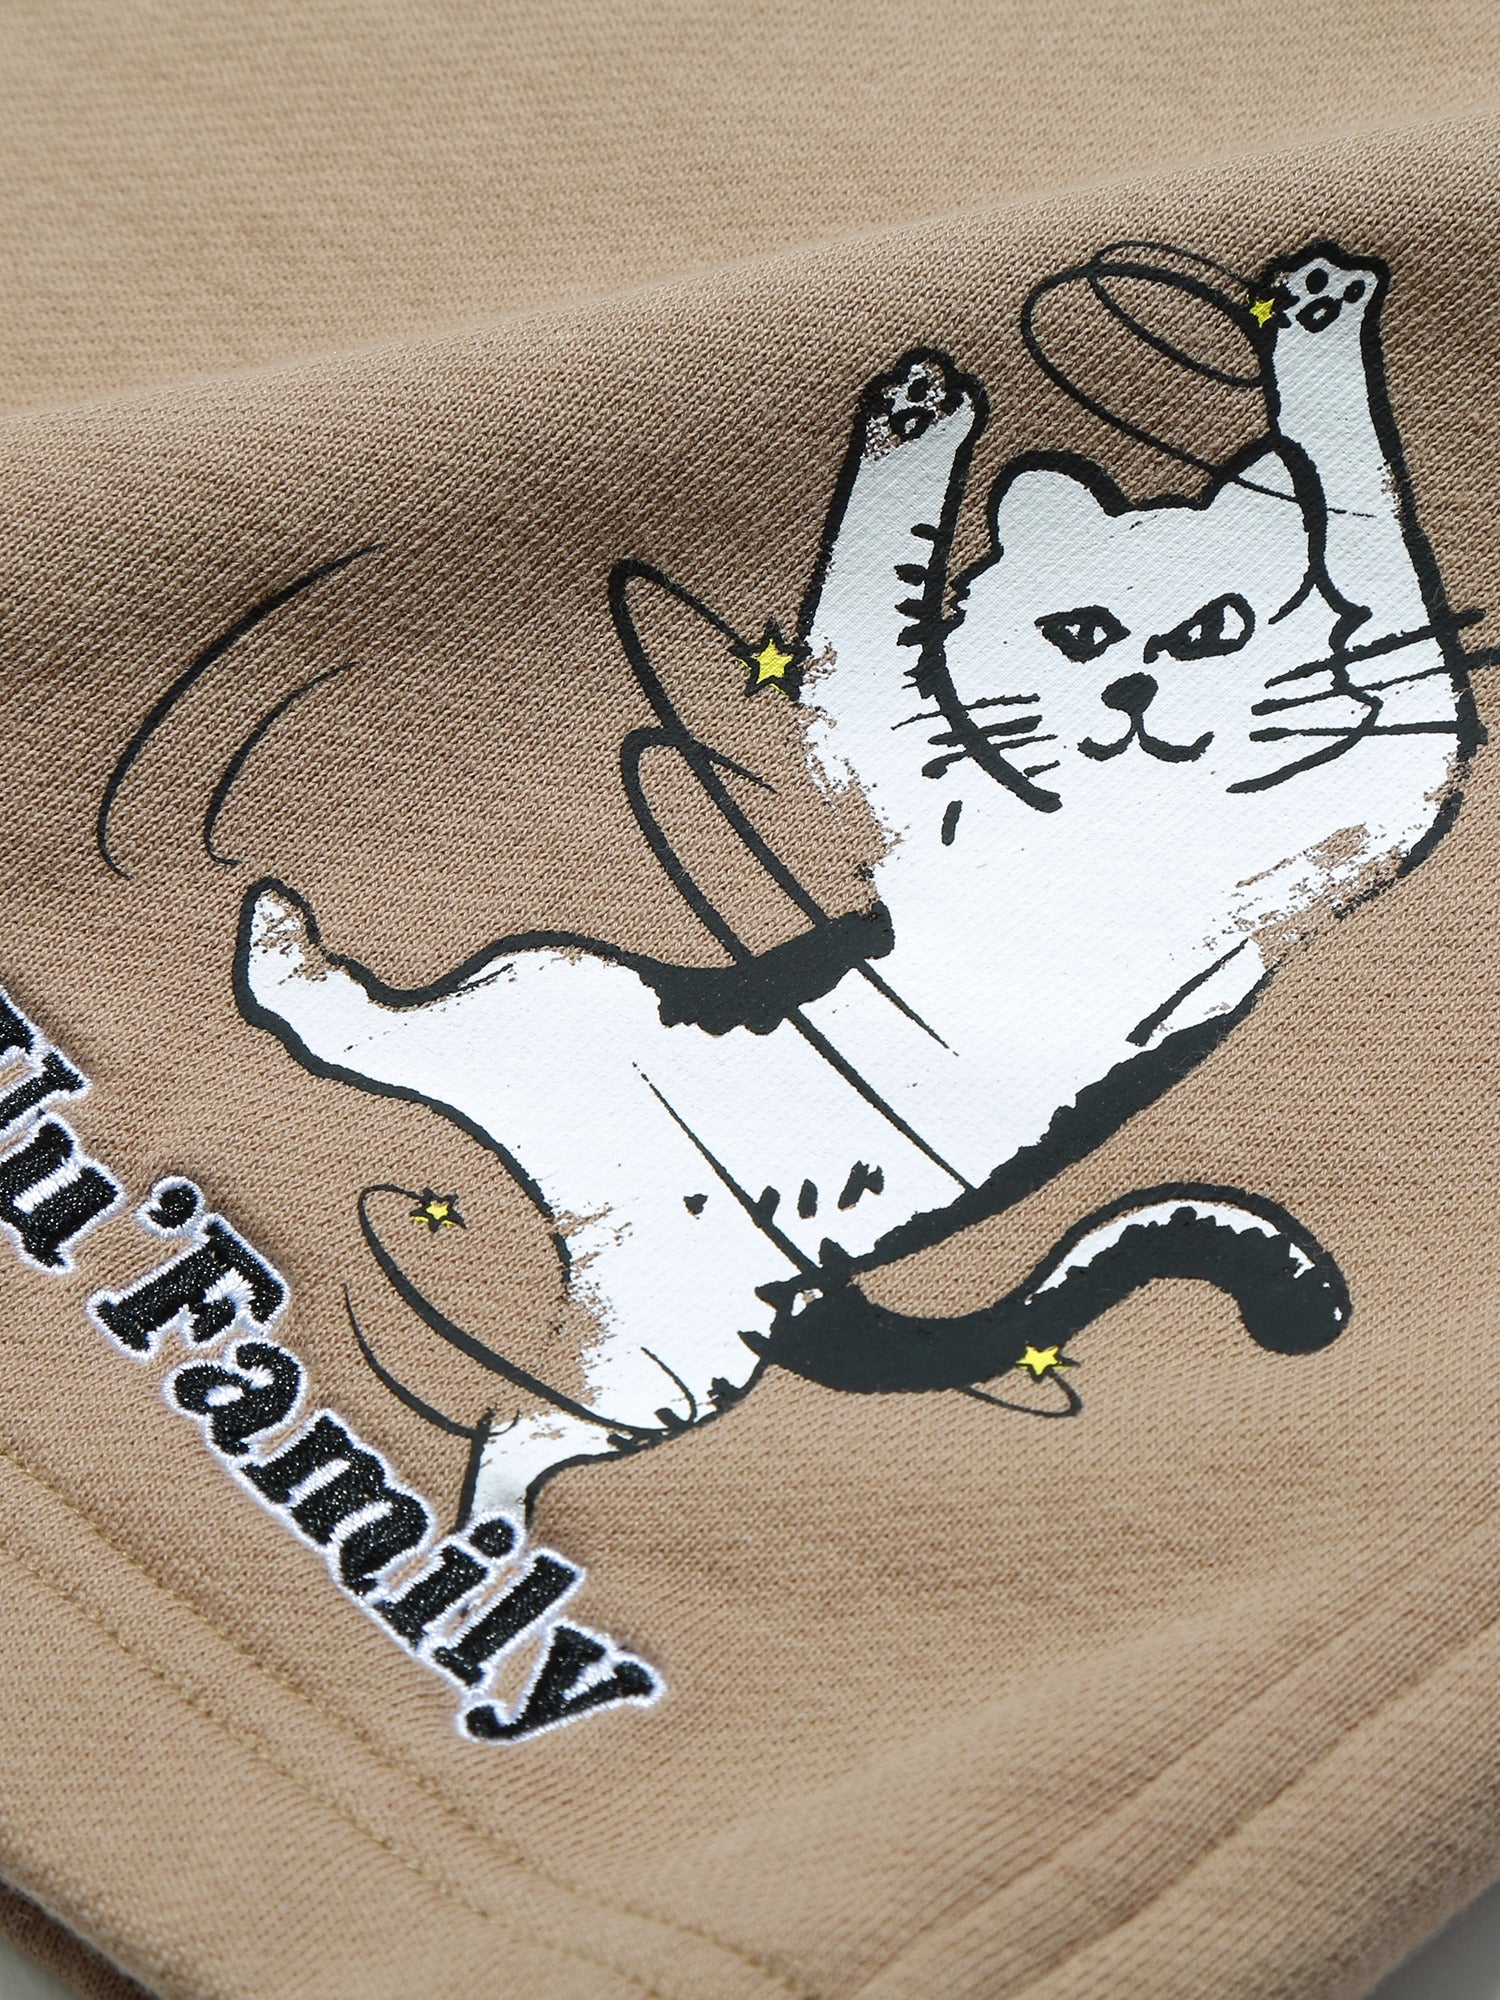 Cat got your tongue? These purrfect khaki shorts with a cat print will definitely turn heads.